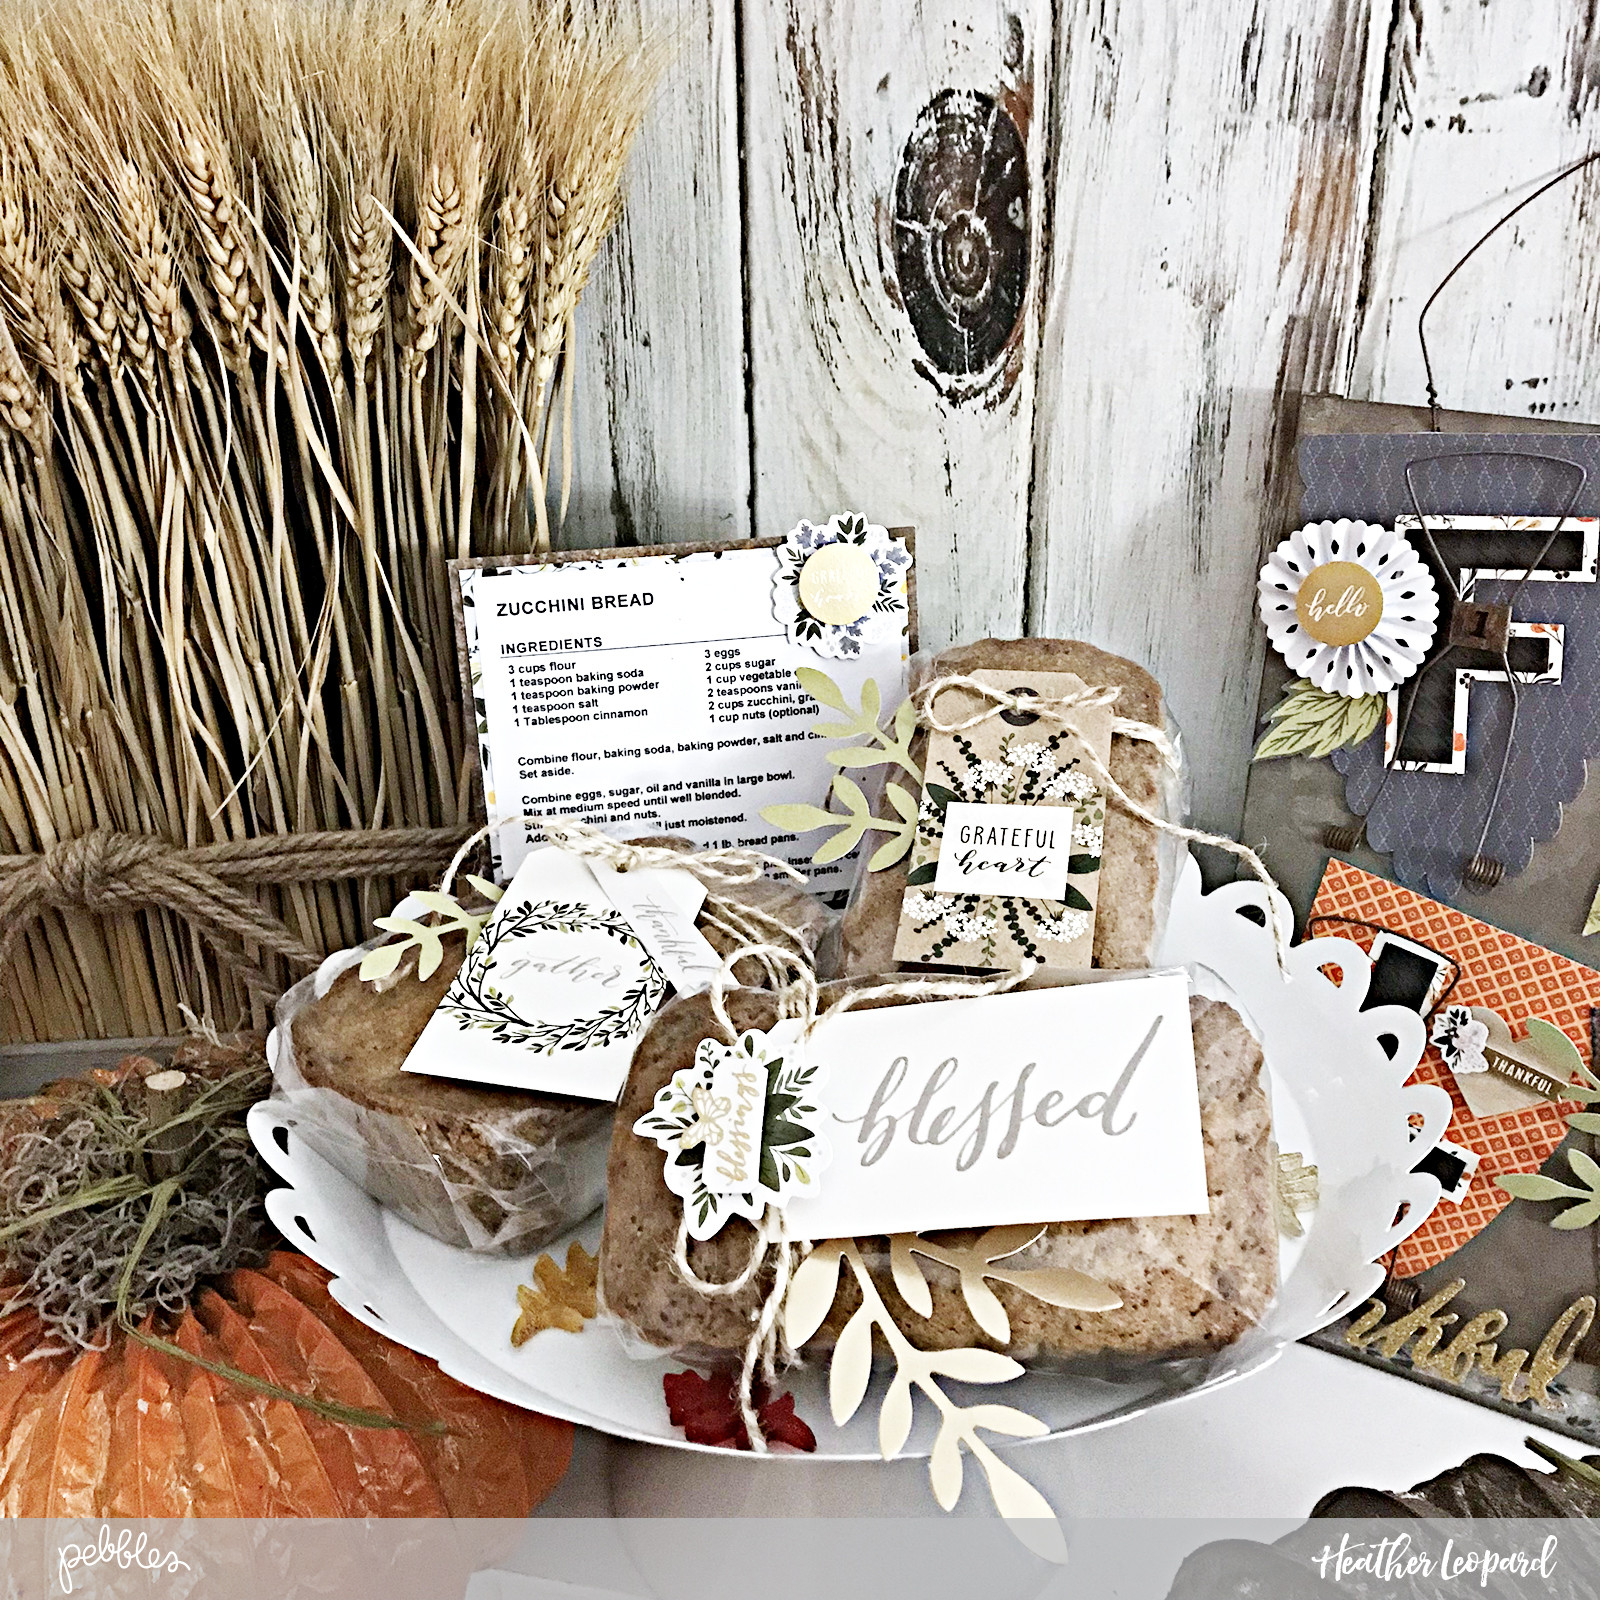 Gift Ideas For Thanksgiving Guests
 Heather Leopard